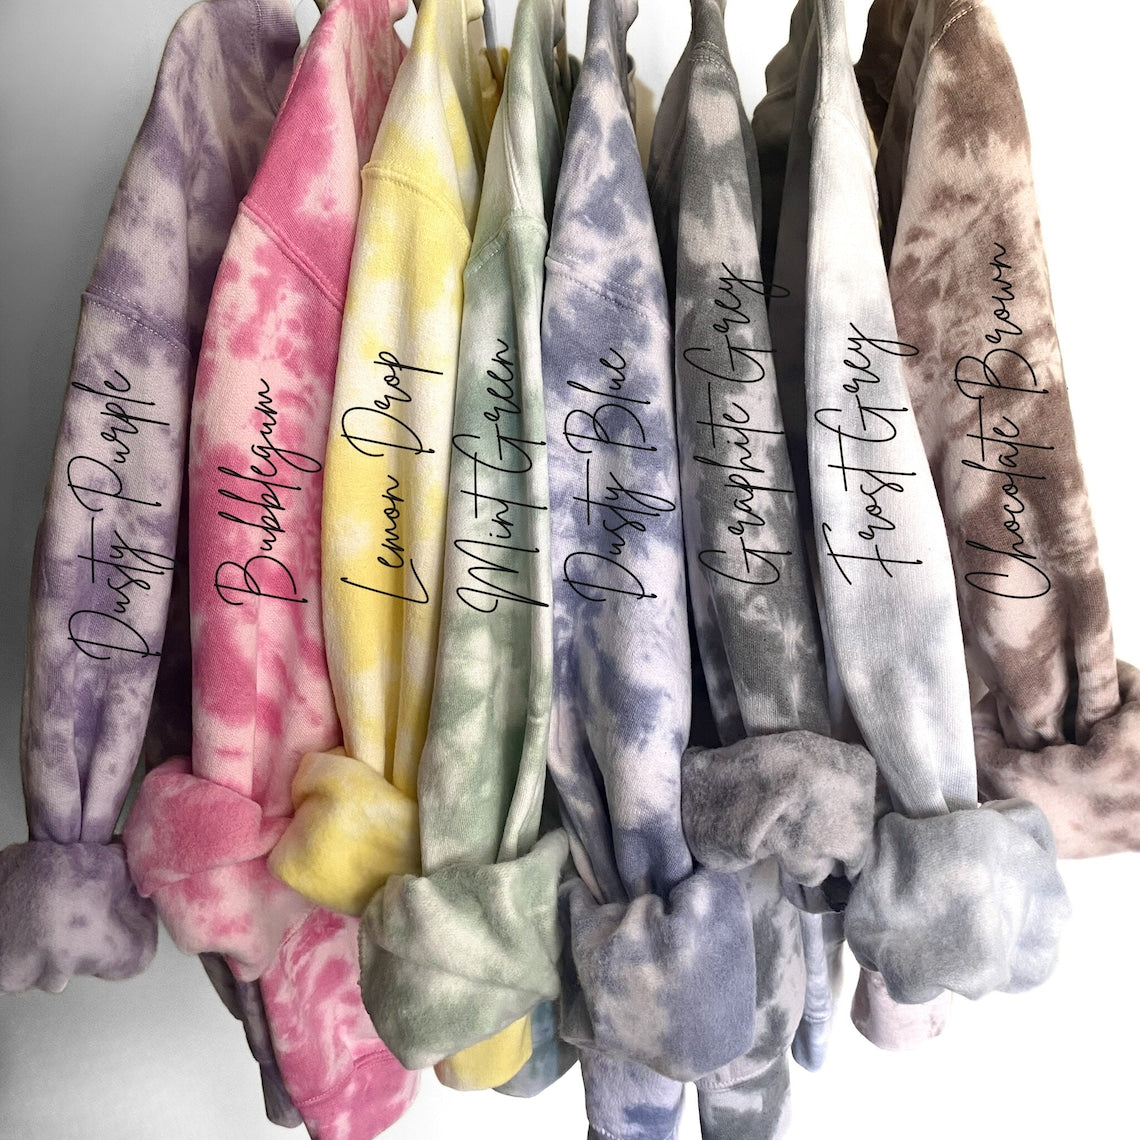 Personalized Tie Dye Embroidered Mama Sweatshirt Mother's Day Gift